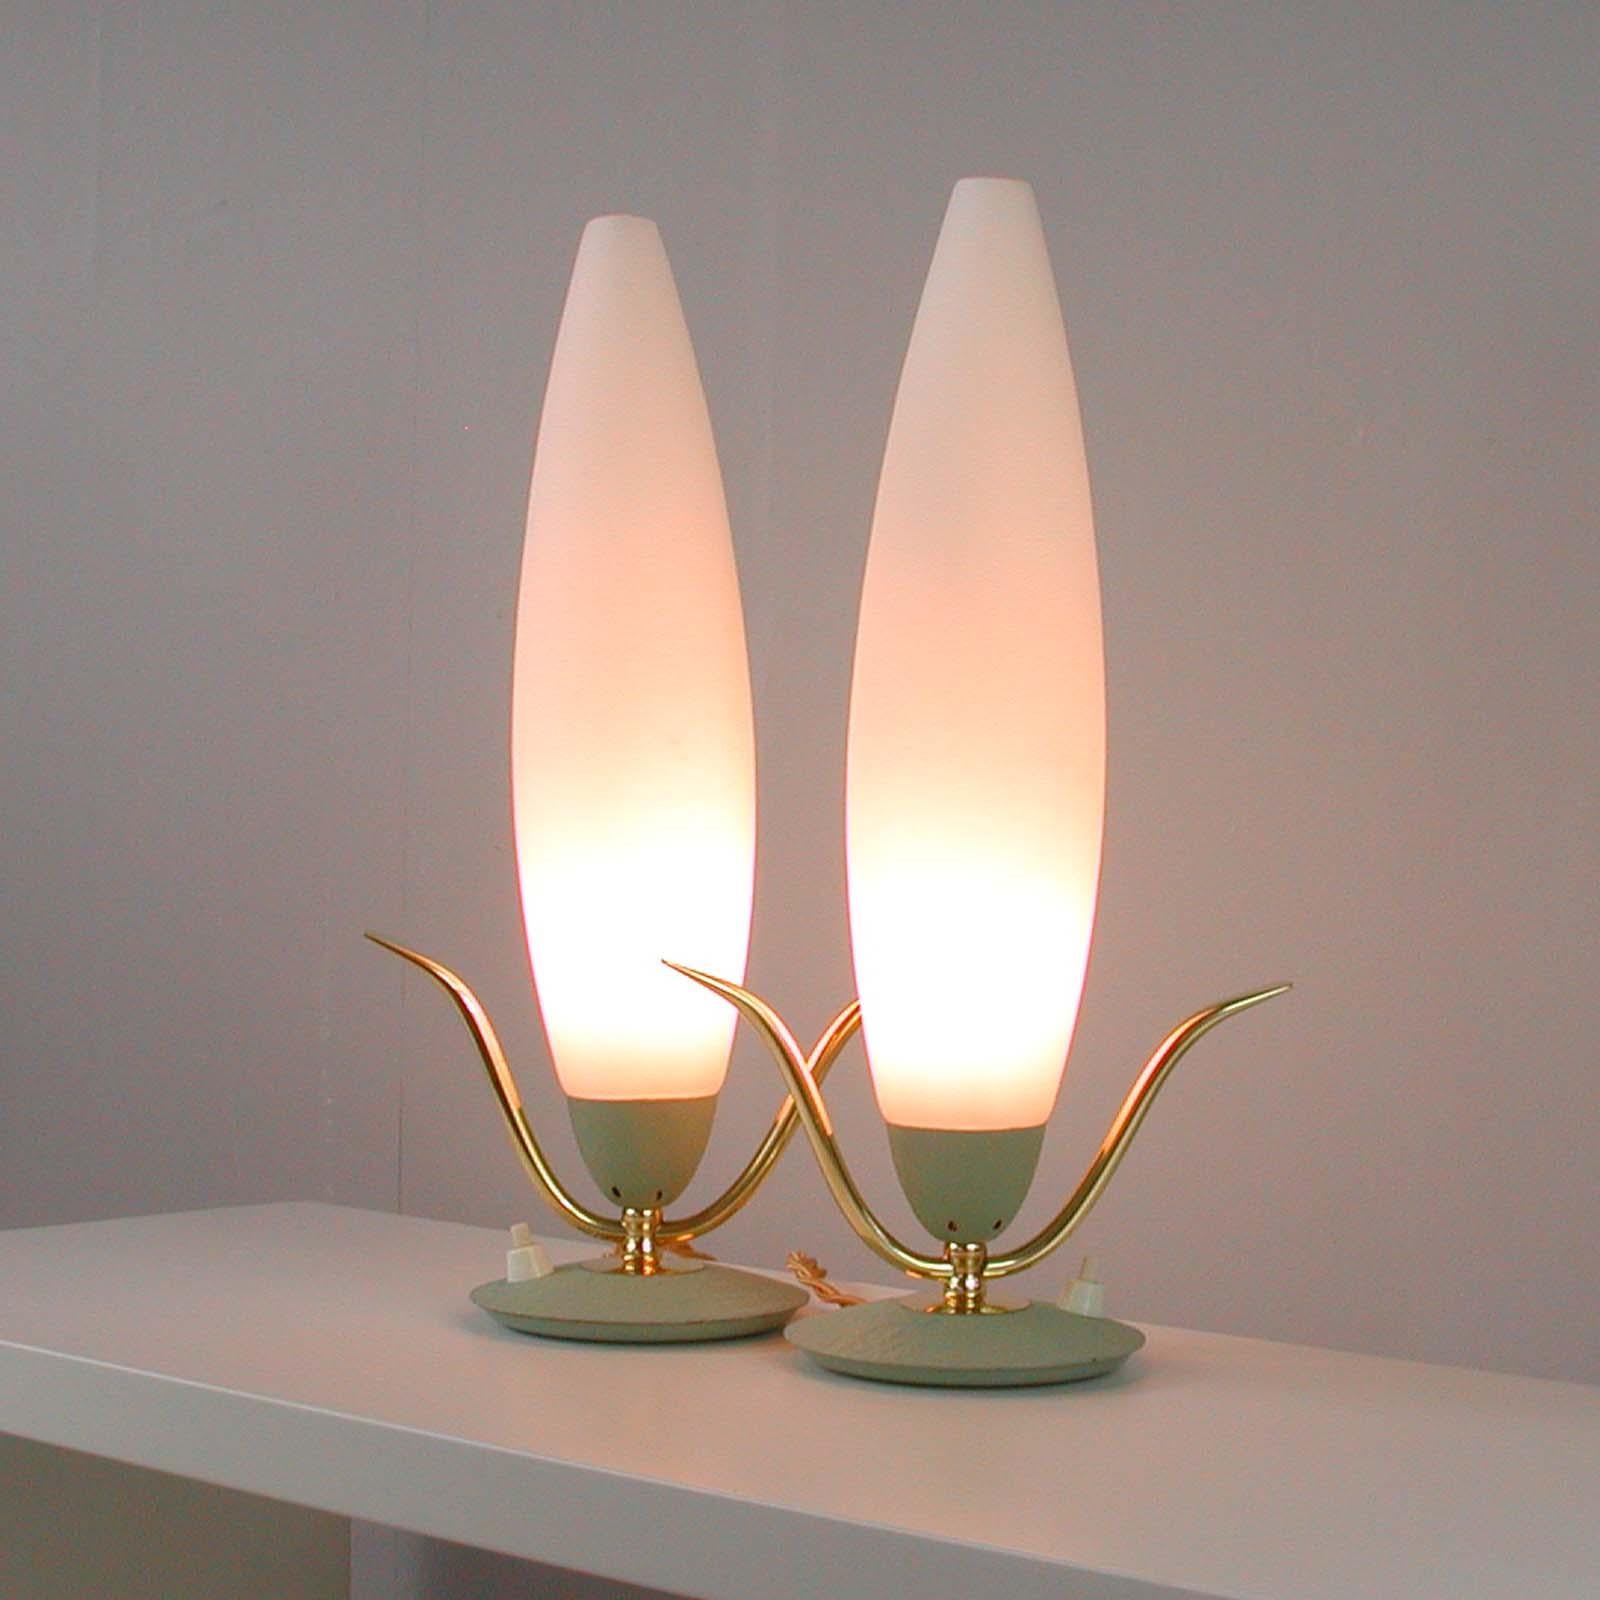 Midcentury Italian Sputnik Mint and Satinated Glass Table Lamps, 1950s, Set of 2 For Sale 2